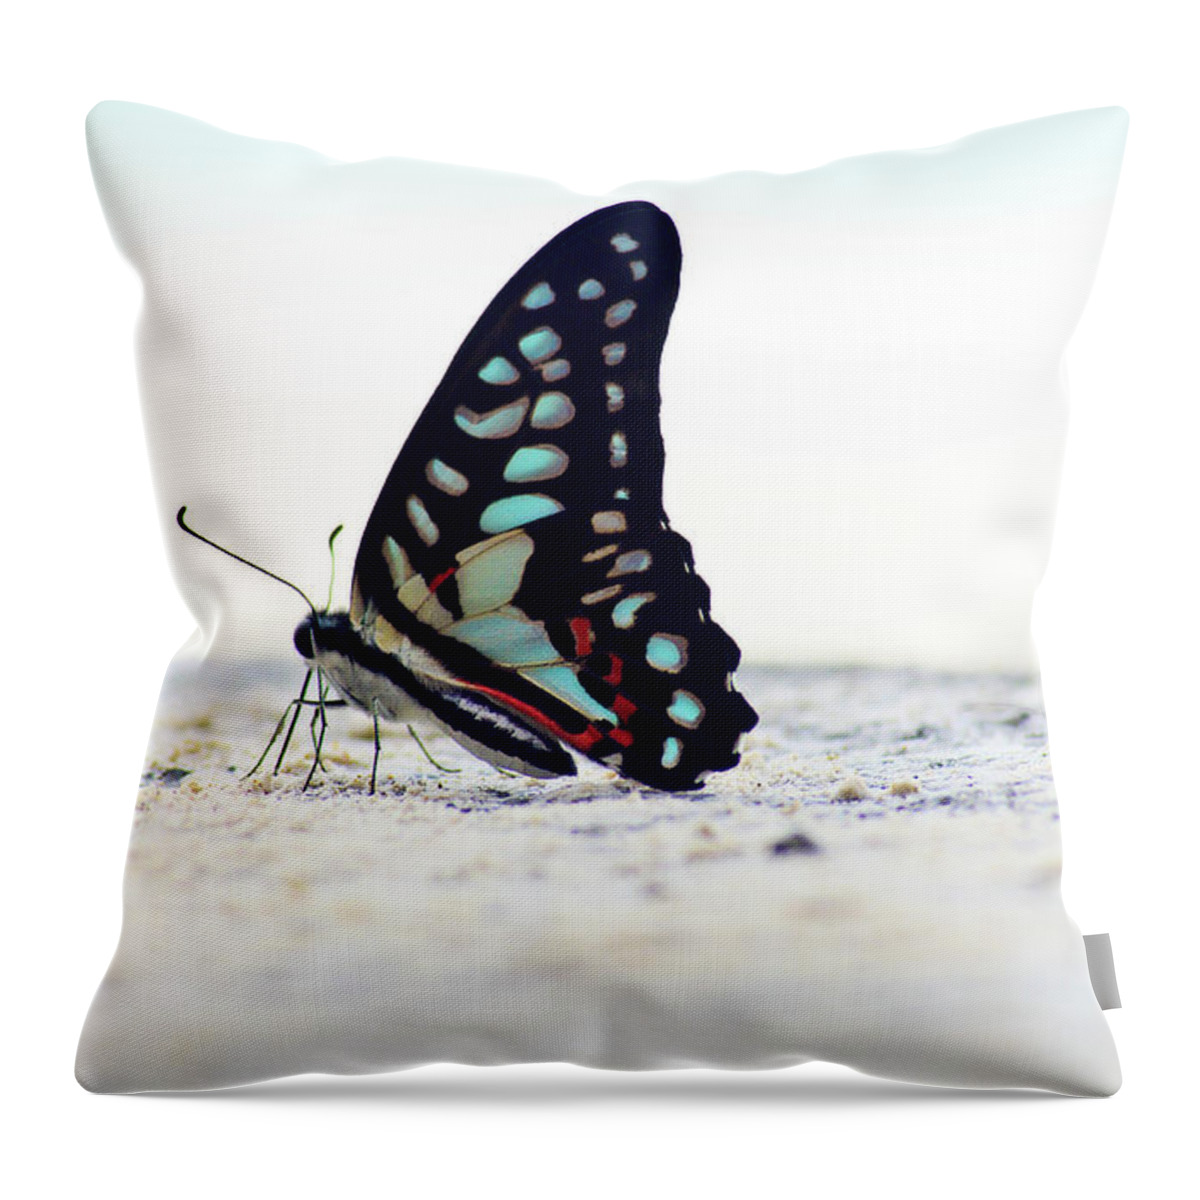 Animal Themes Throw Pillow featuring the photograph Butterfly On The Beach by Photo By Shaz Ni